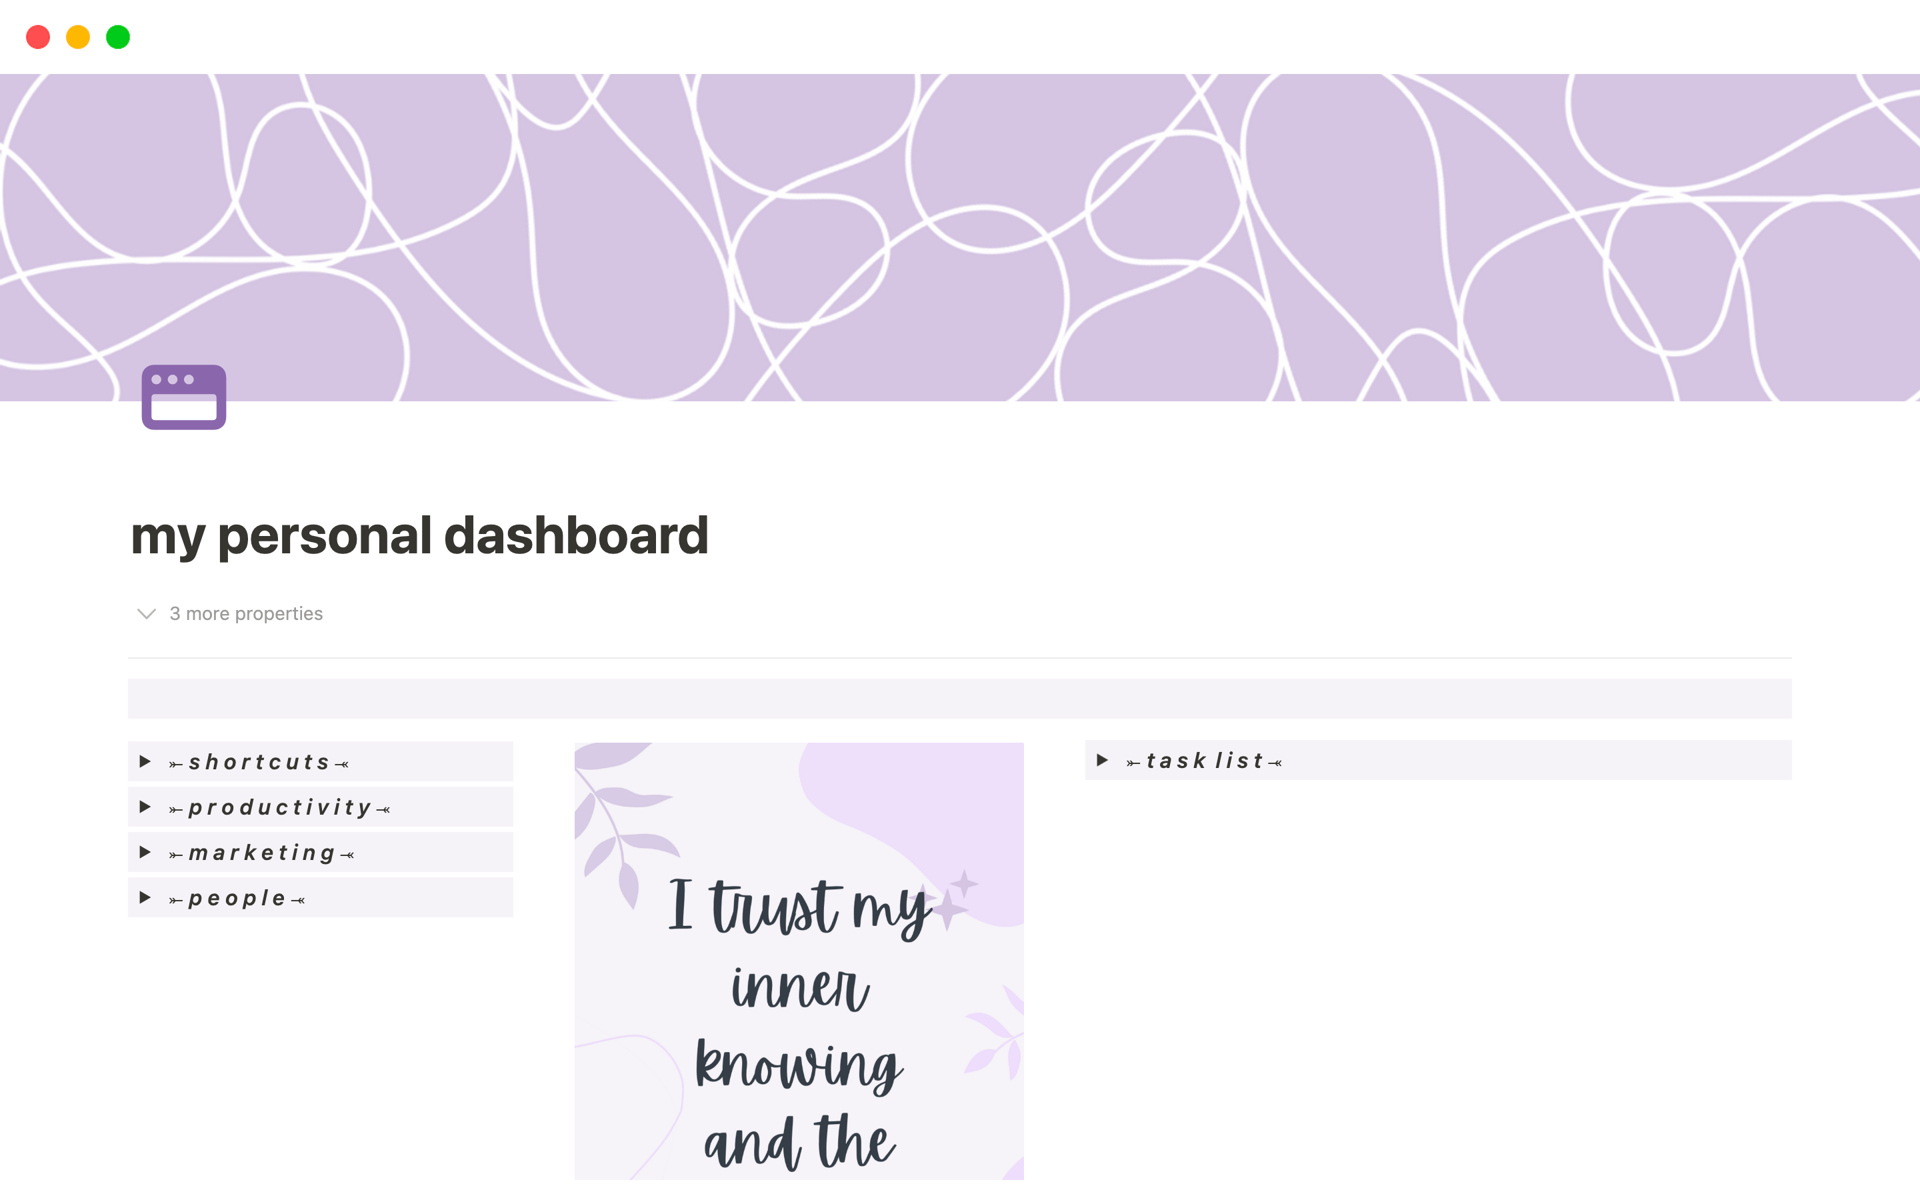 A dashboard for keeping track of all your business things